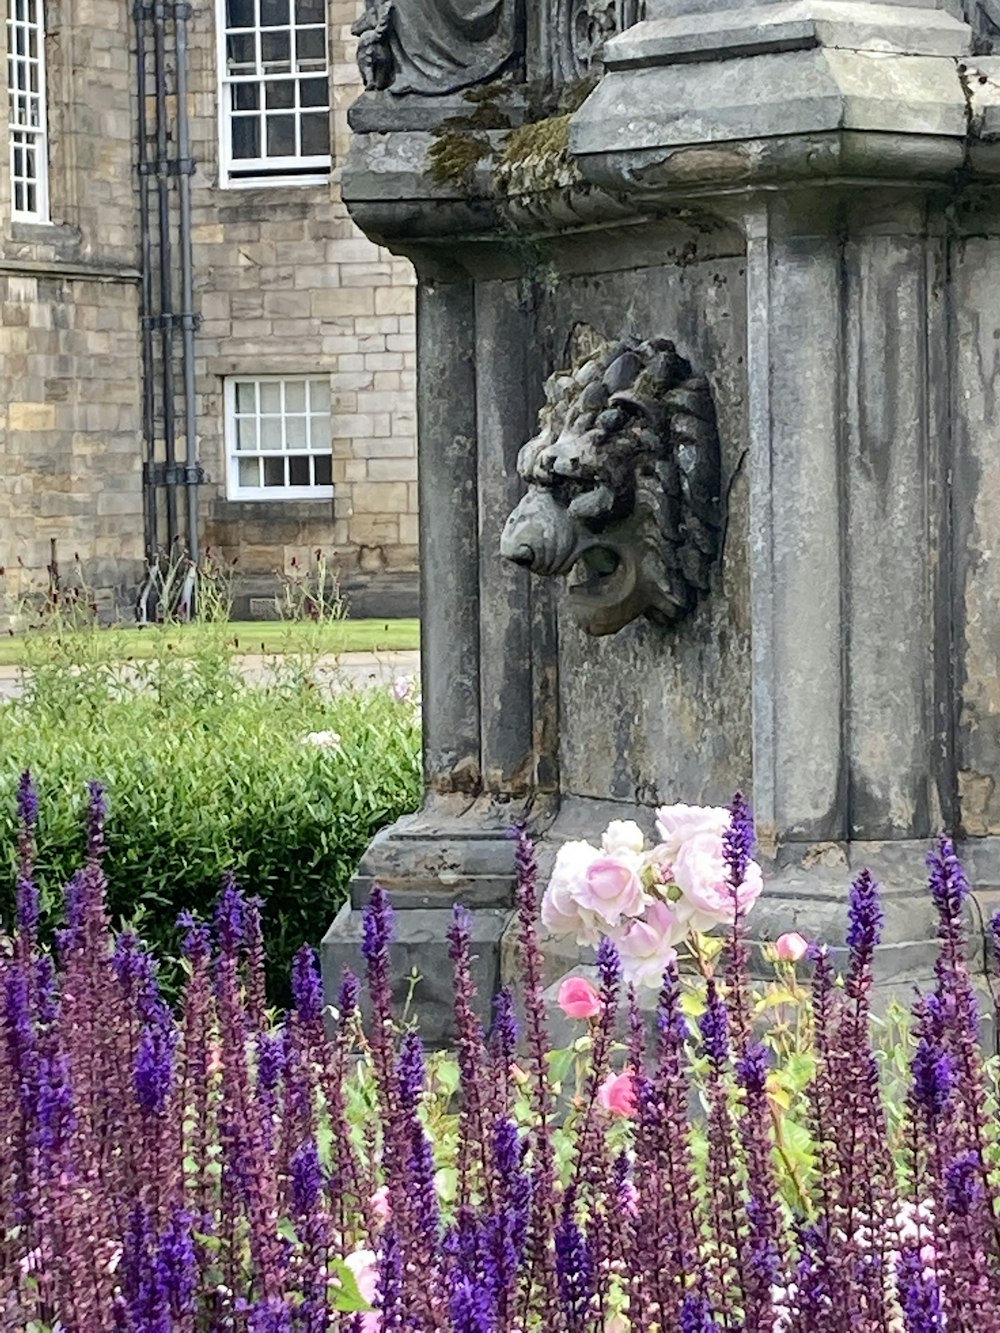 a statue of a lion surrounded by purple flowers